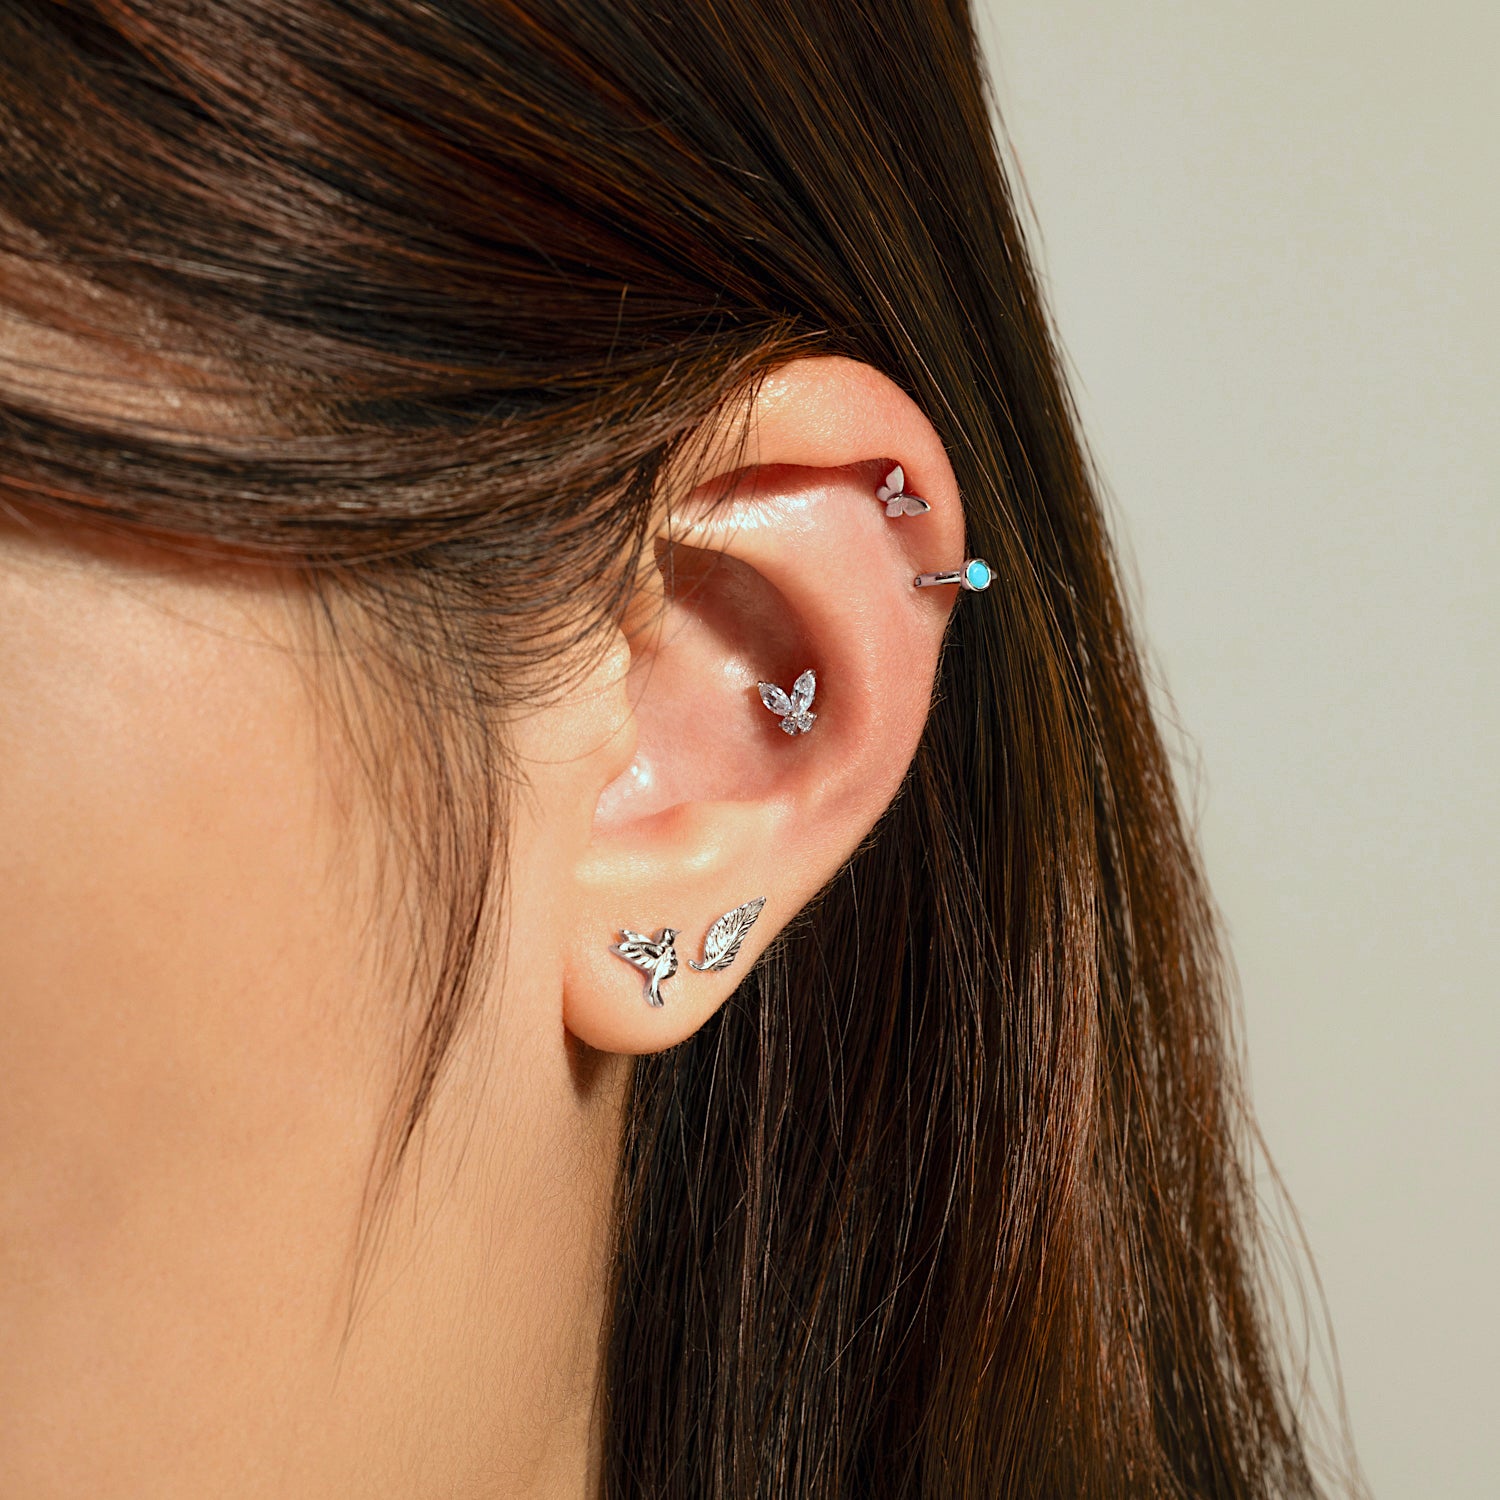 I want these two flat piercings with similar jewelry. My ears are super  small and I don't know if it would look good or even fit. What do you guys  think?? :